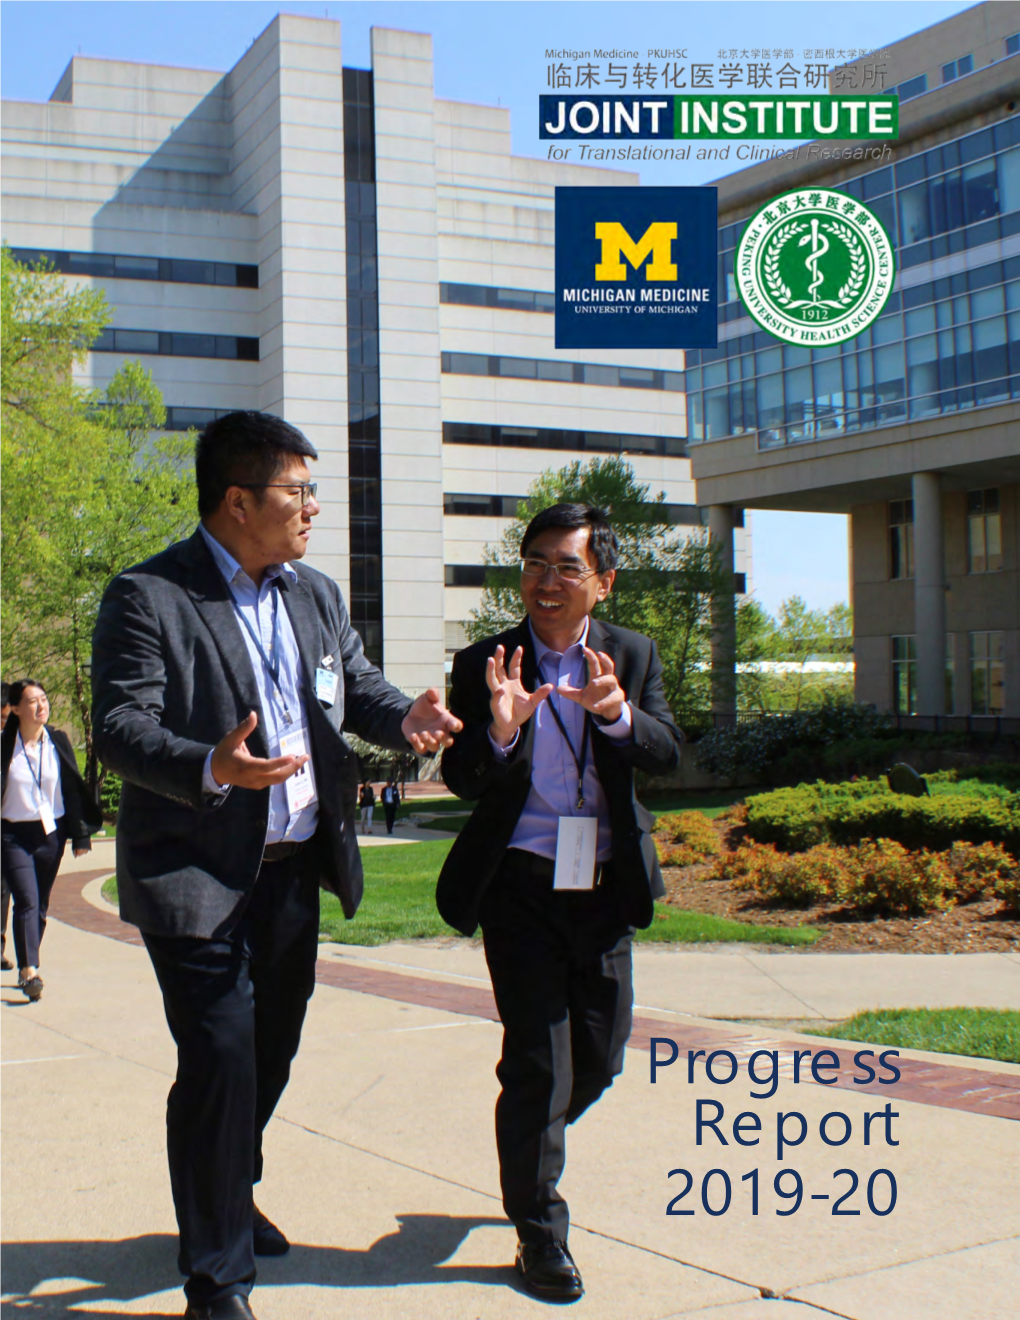 Progress Report 2019-20 Executive Officers of the University of Michigan Health System:Marschall S